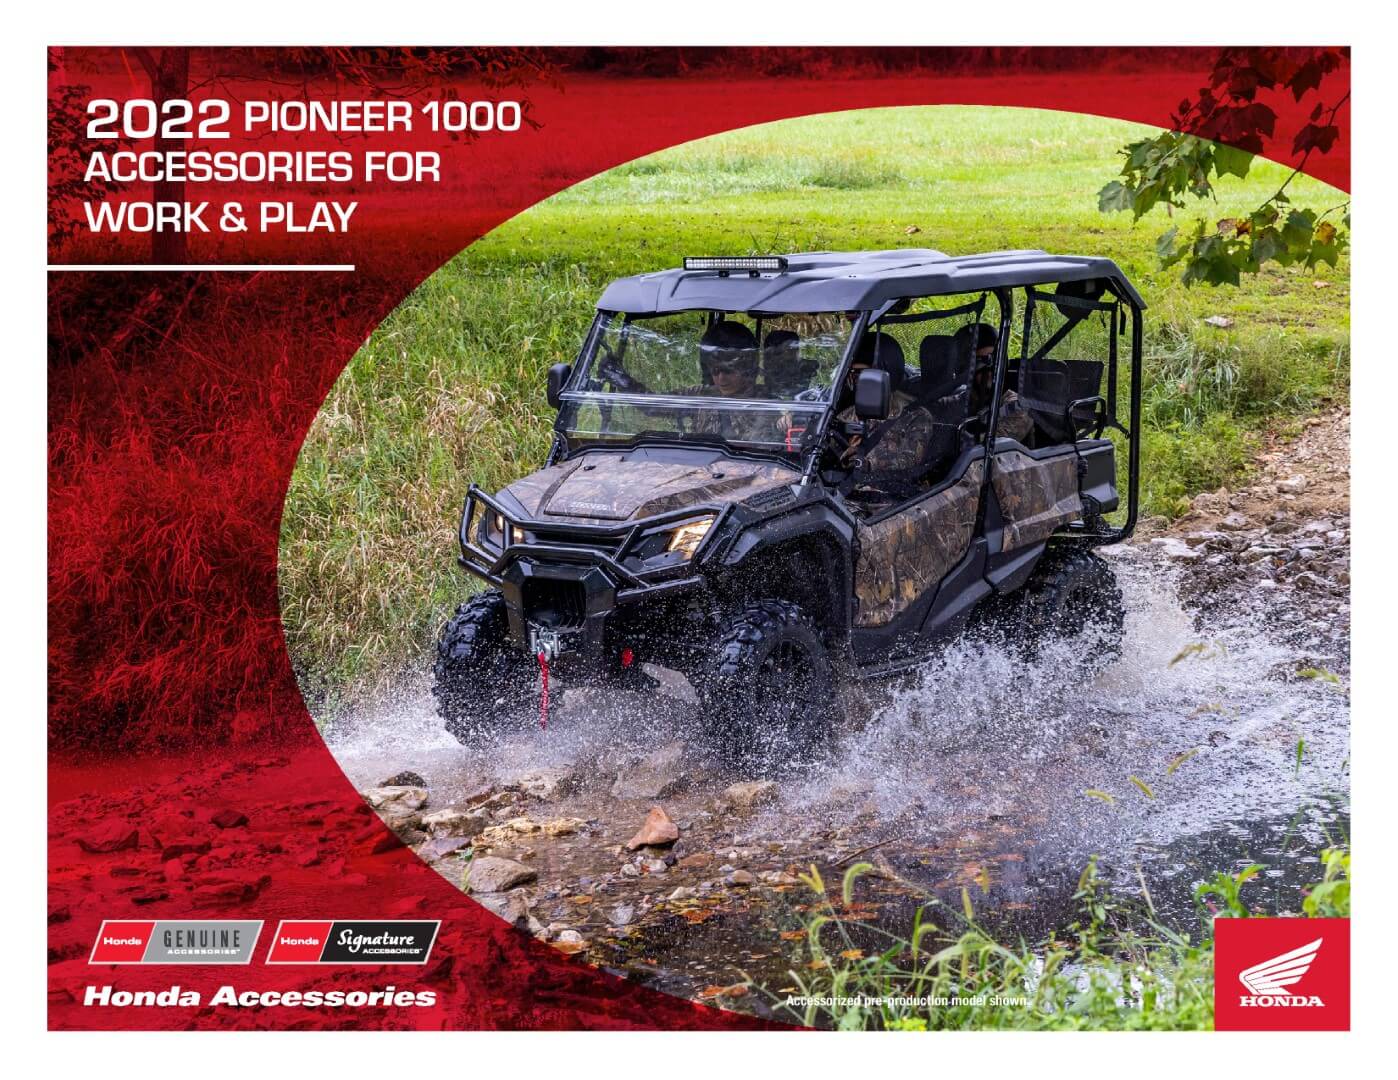 2022 Honda Pioneer 1000 Accessory Catalog / Accessories | Page 1 (including Pioneer 1000-5 Accessories)